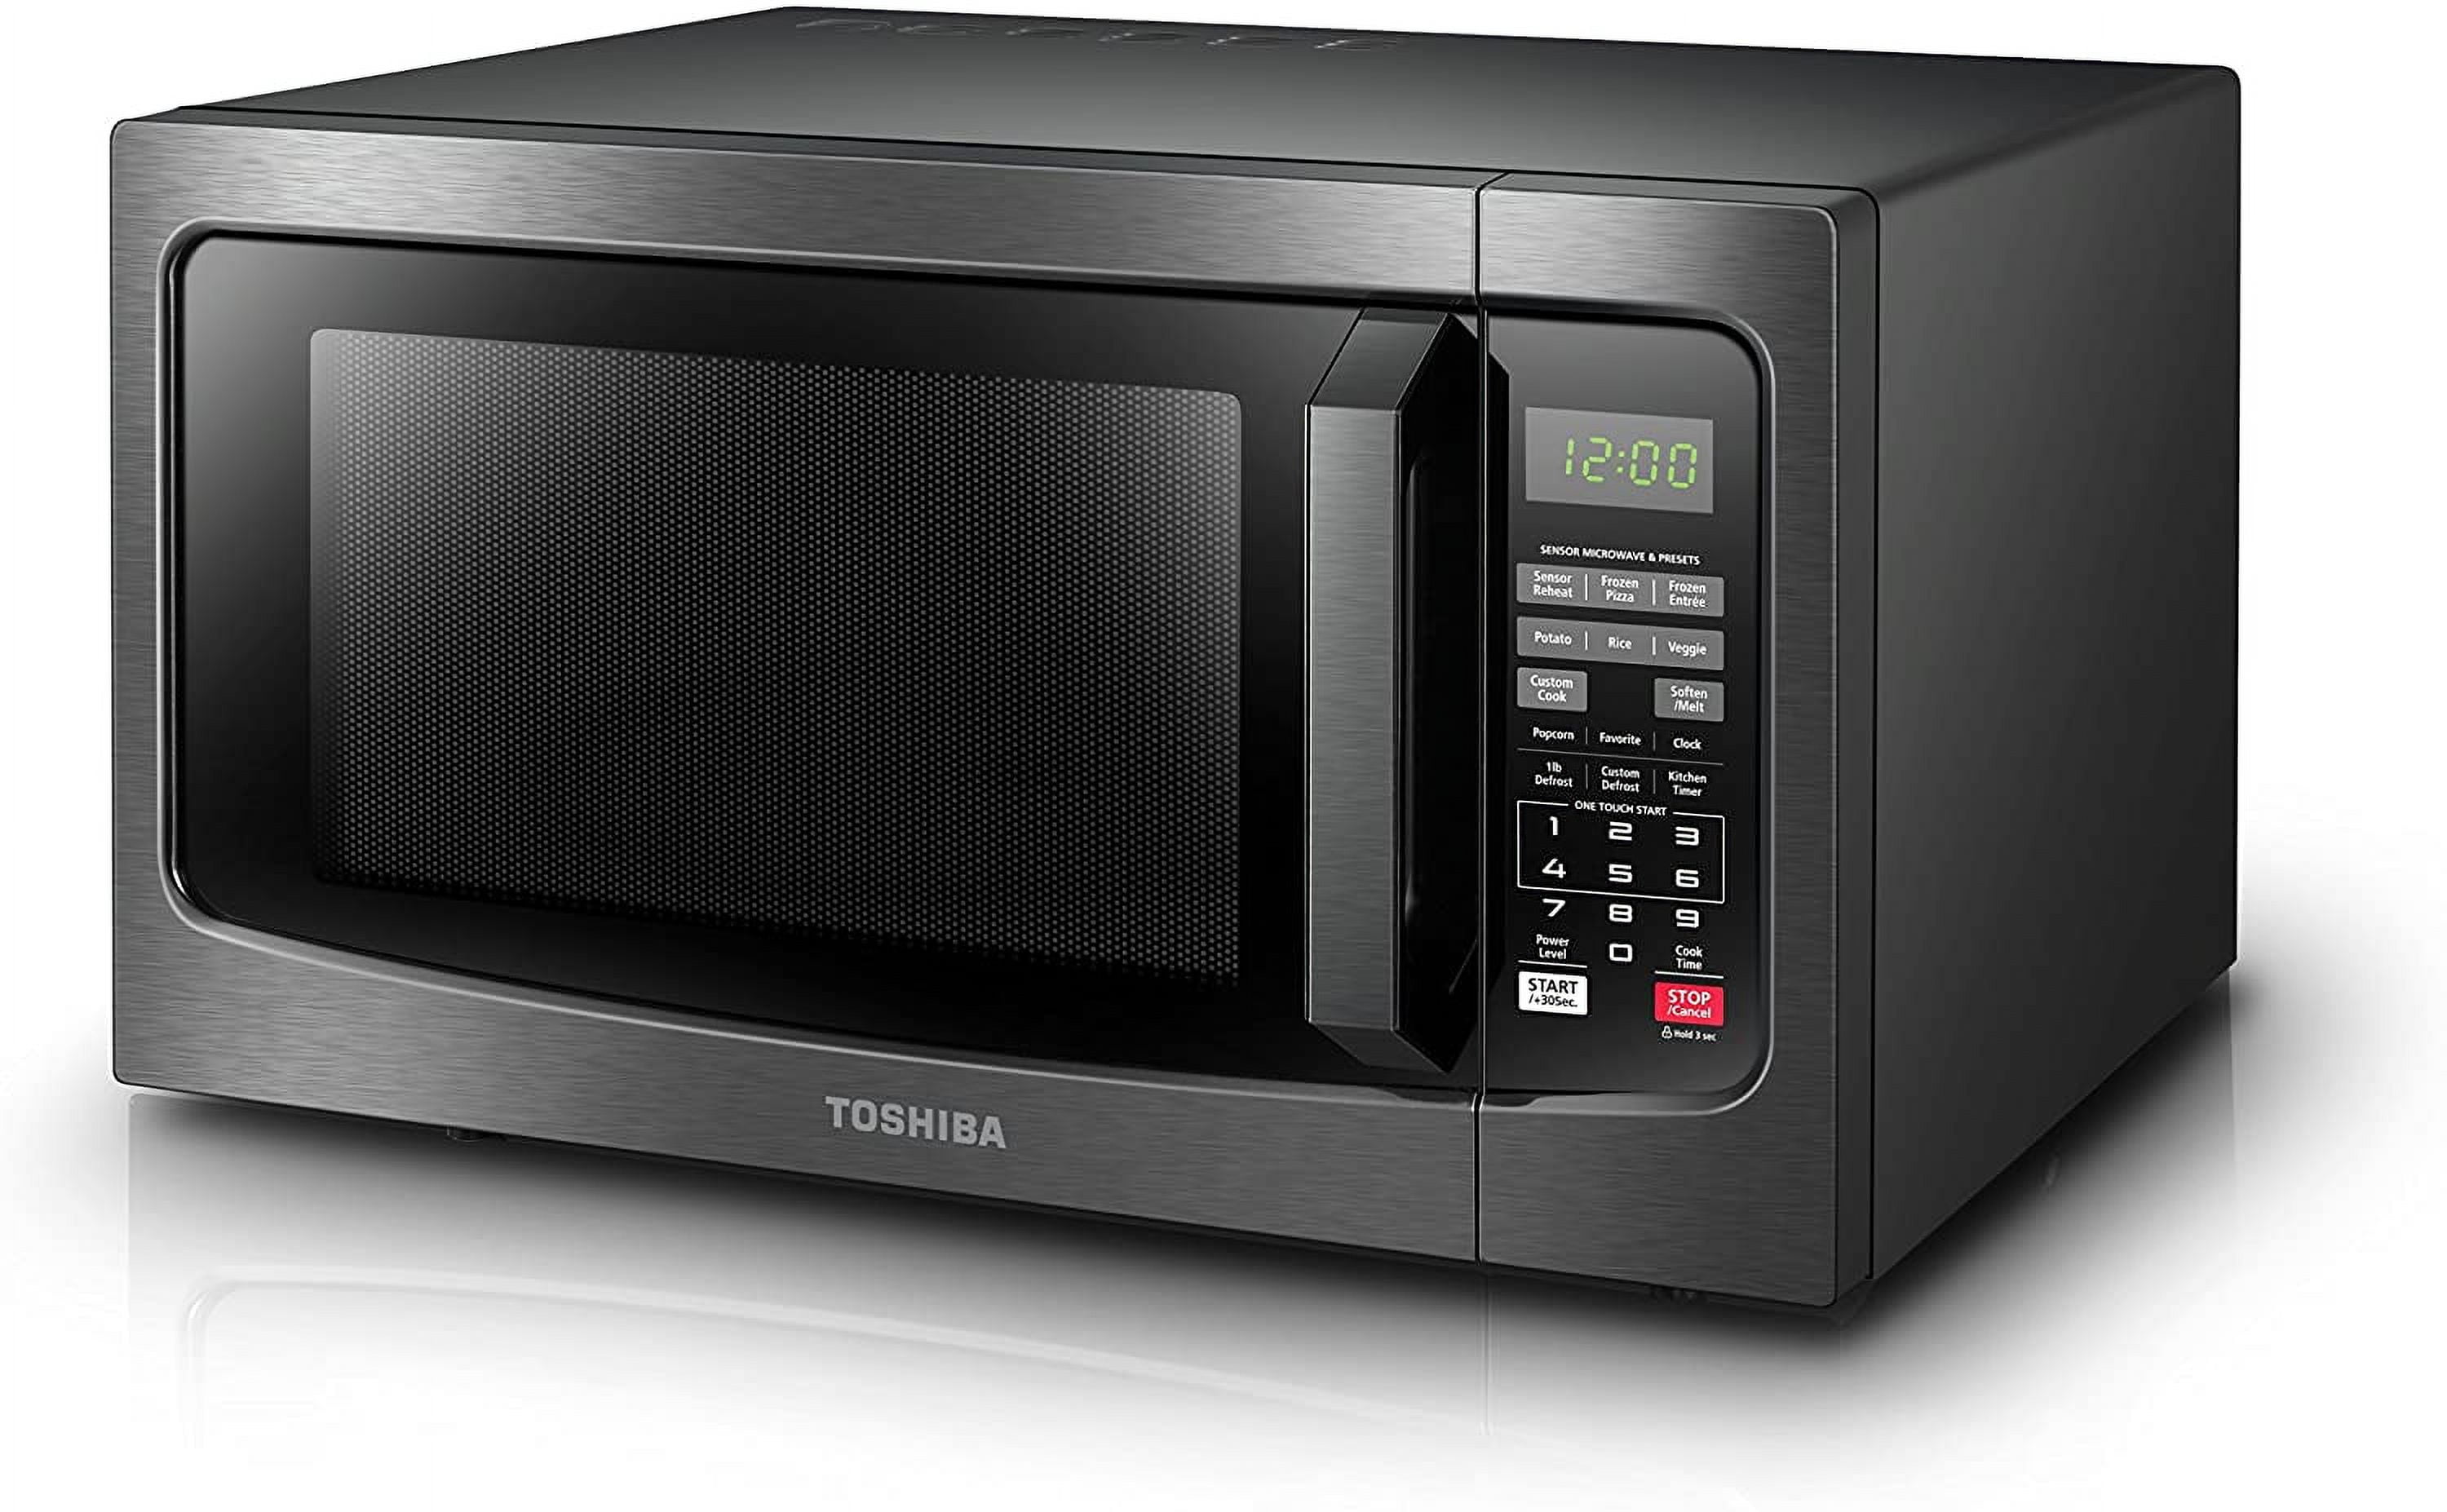 Toshiba ML2 EC10SA-BS 8-1 Air Fry Microwave oven review - The